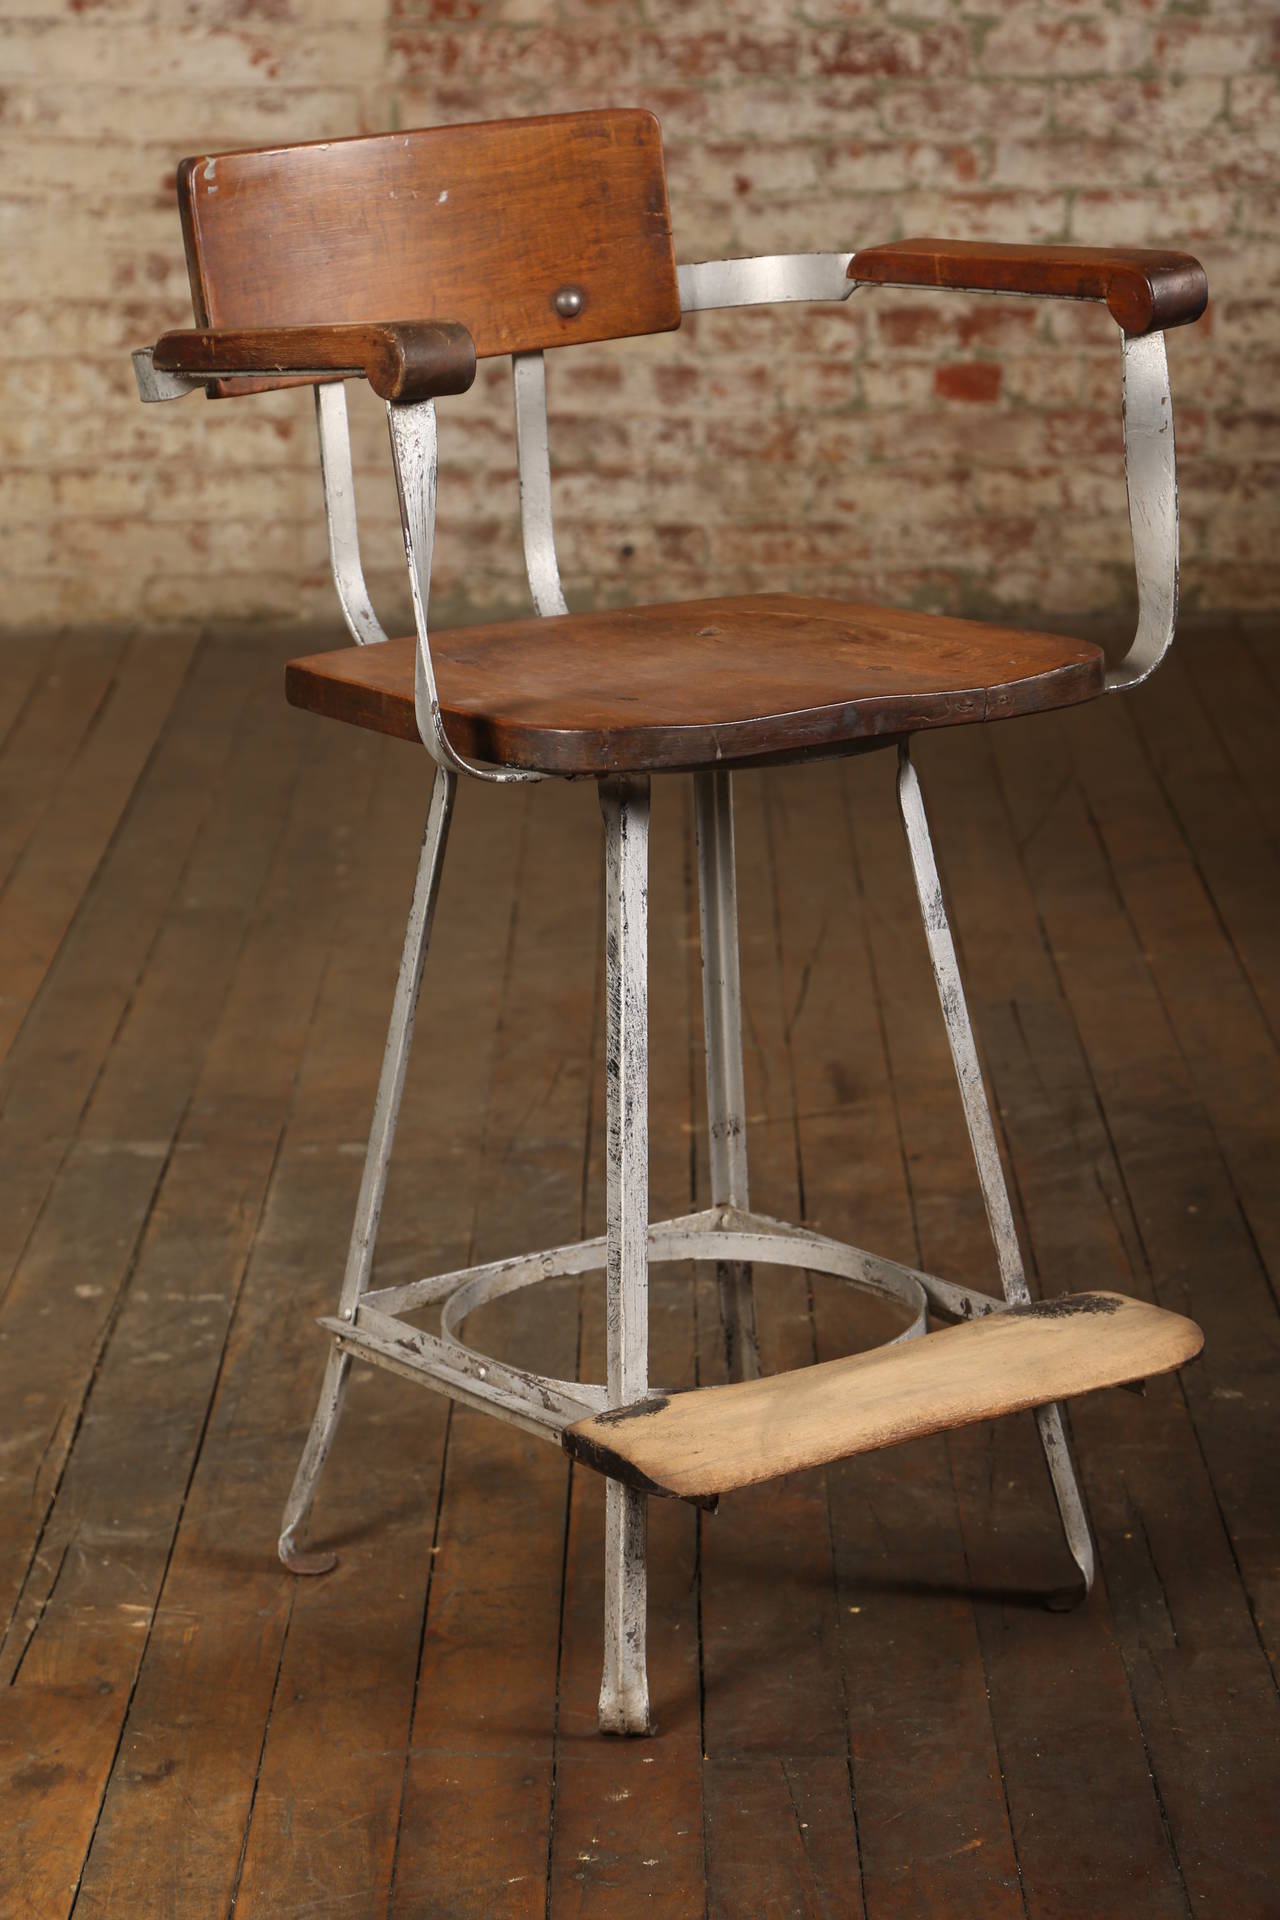 Unique, Vintage Industrial Stool with a Footrest. Seat height is 25